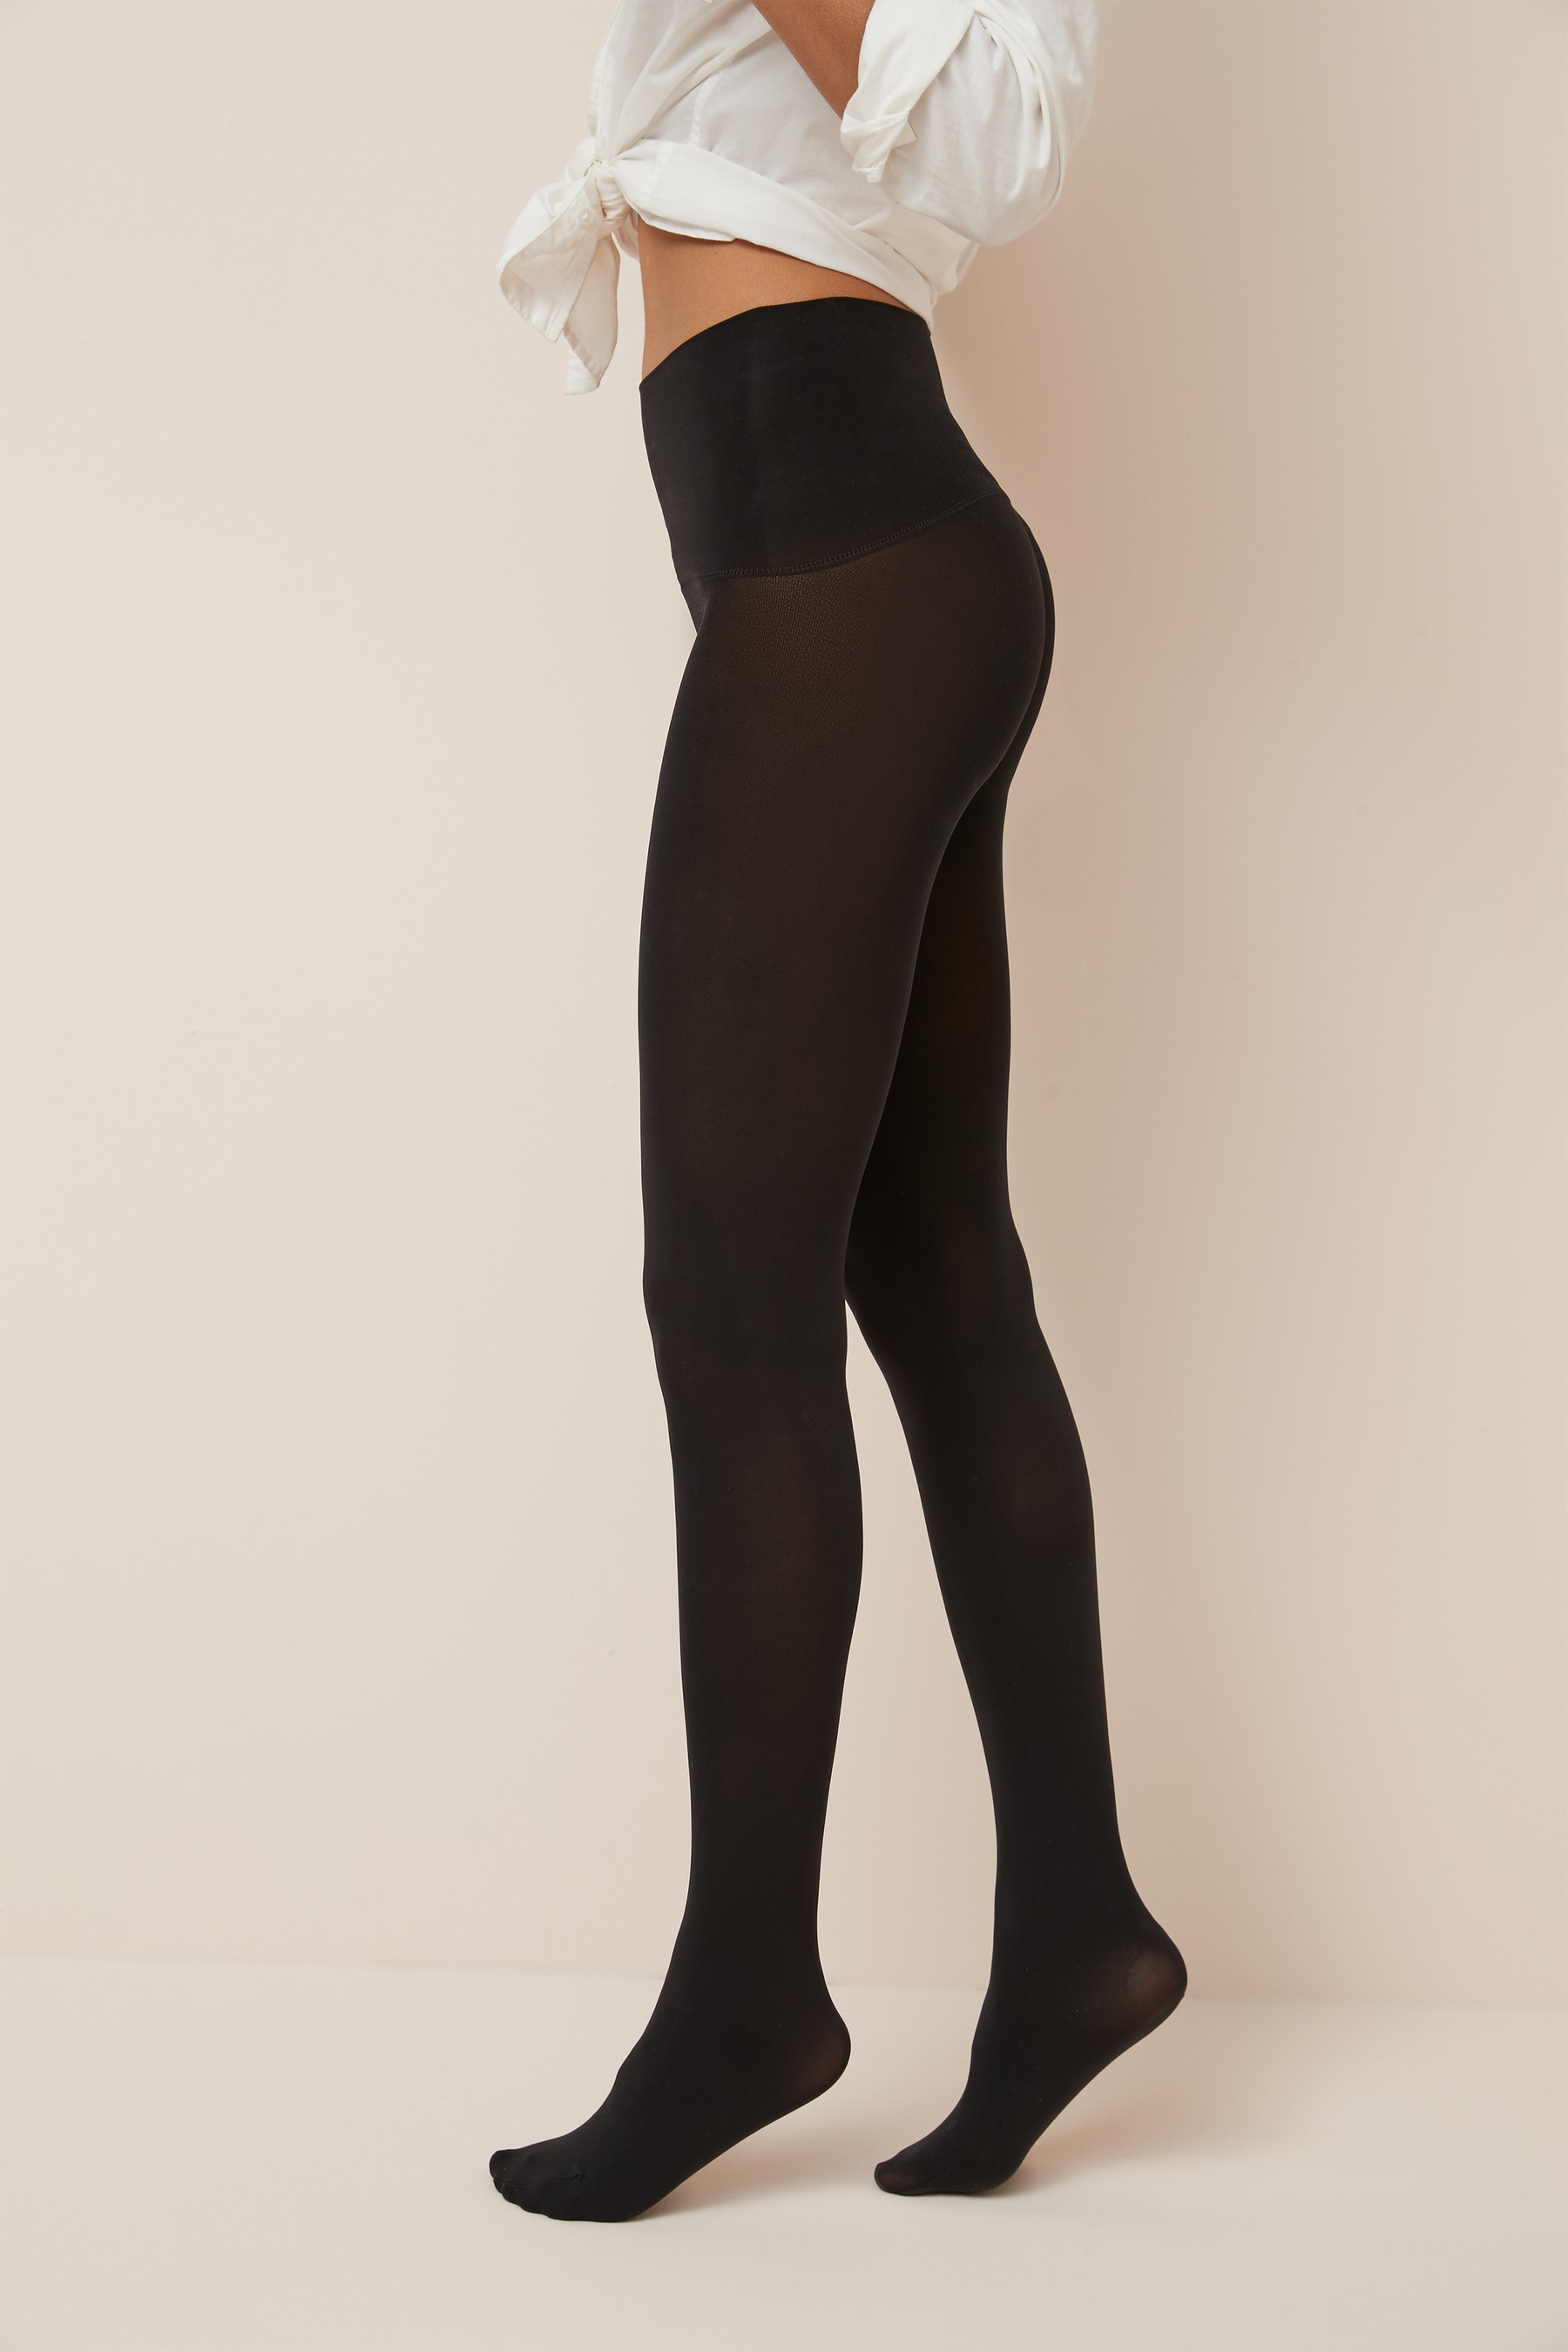 Buy Black Seamless 60 Denier Tights One Pack from the Next UK online shop